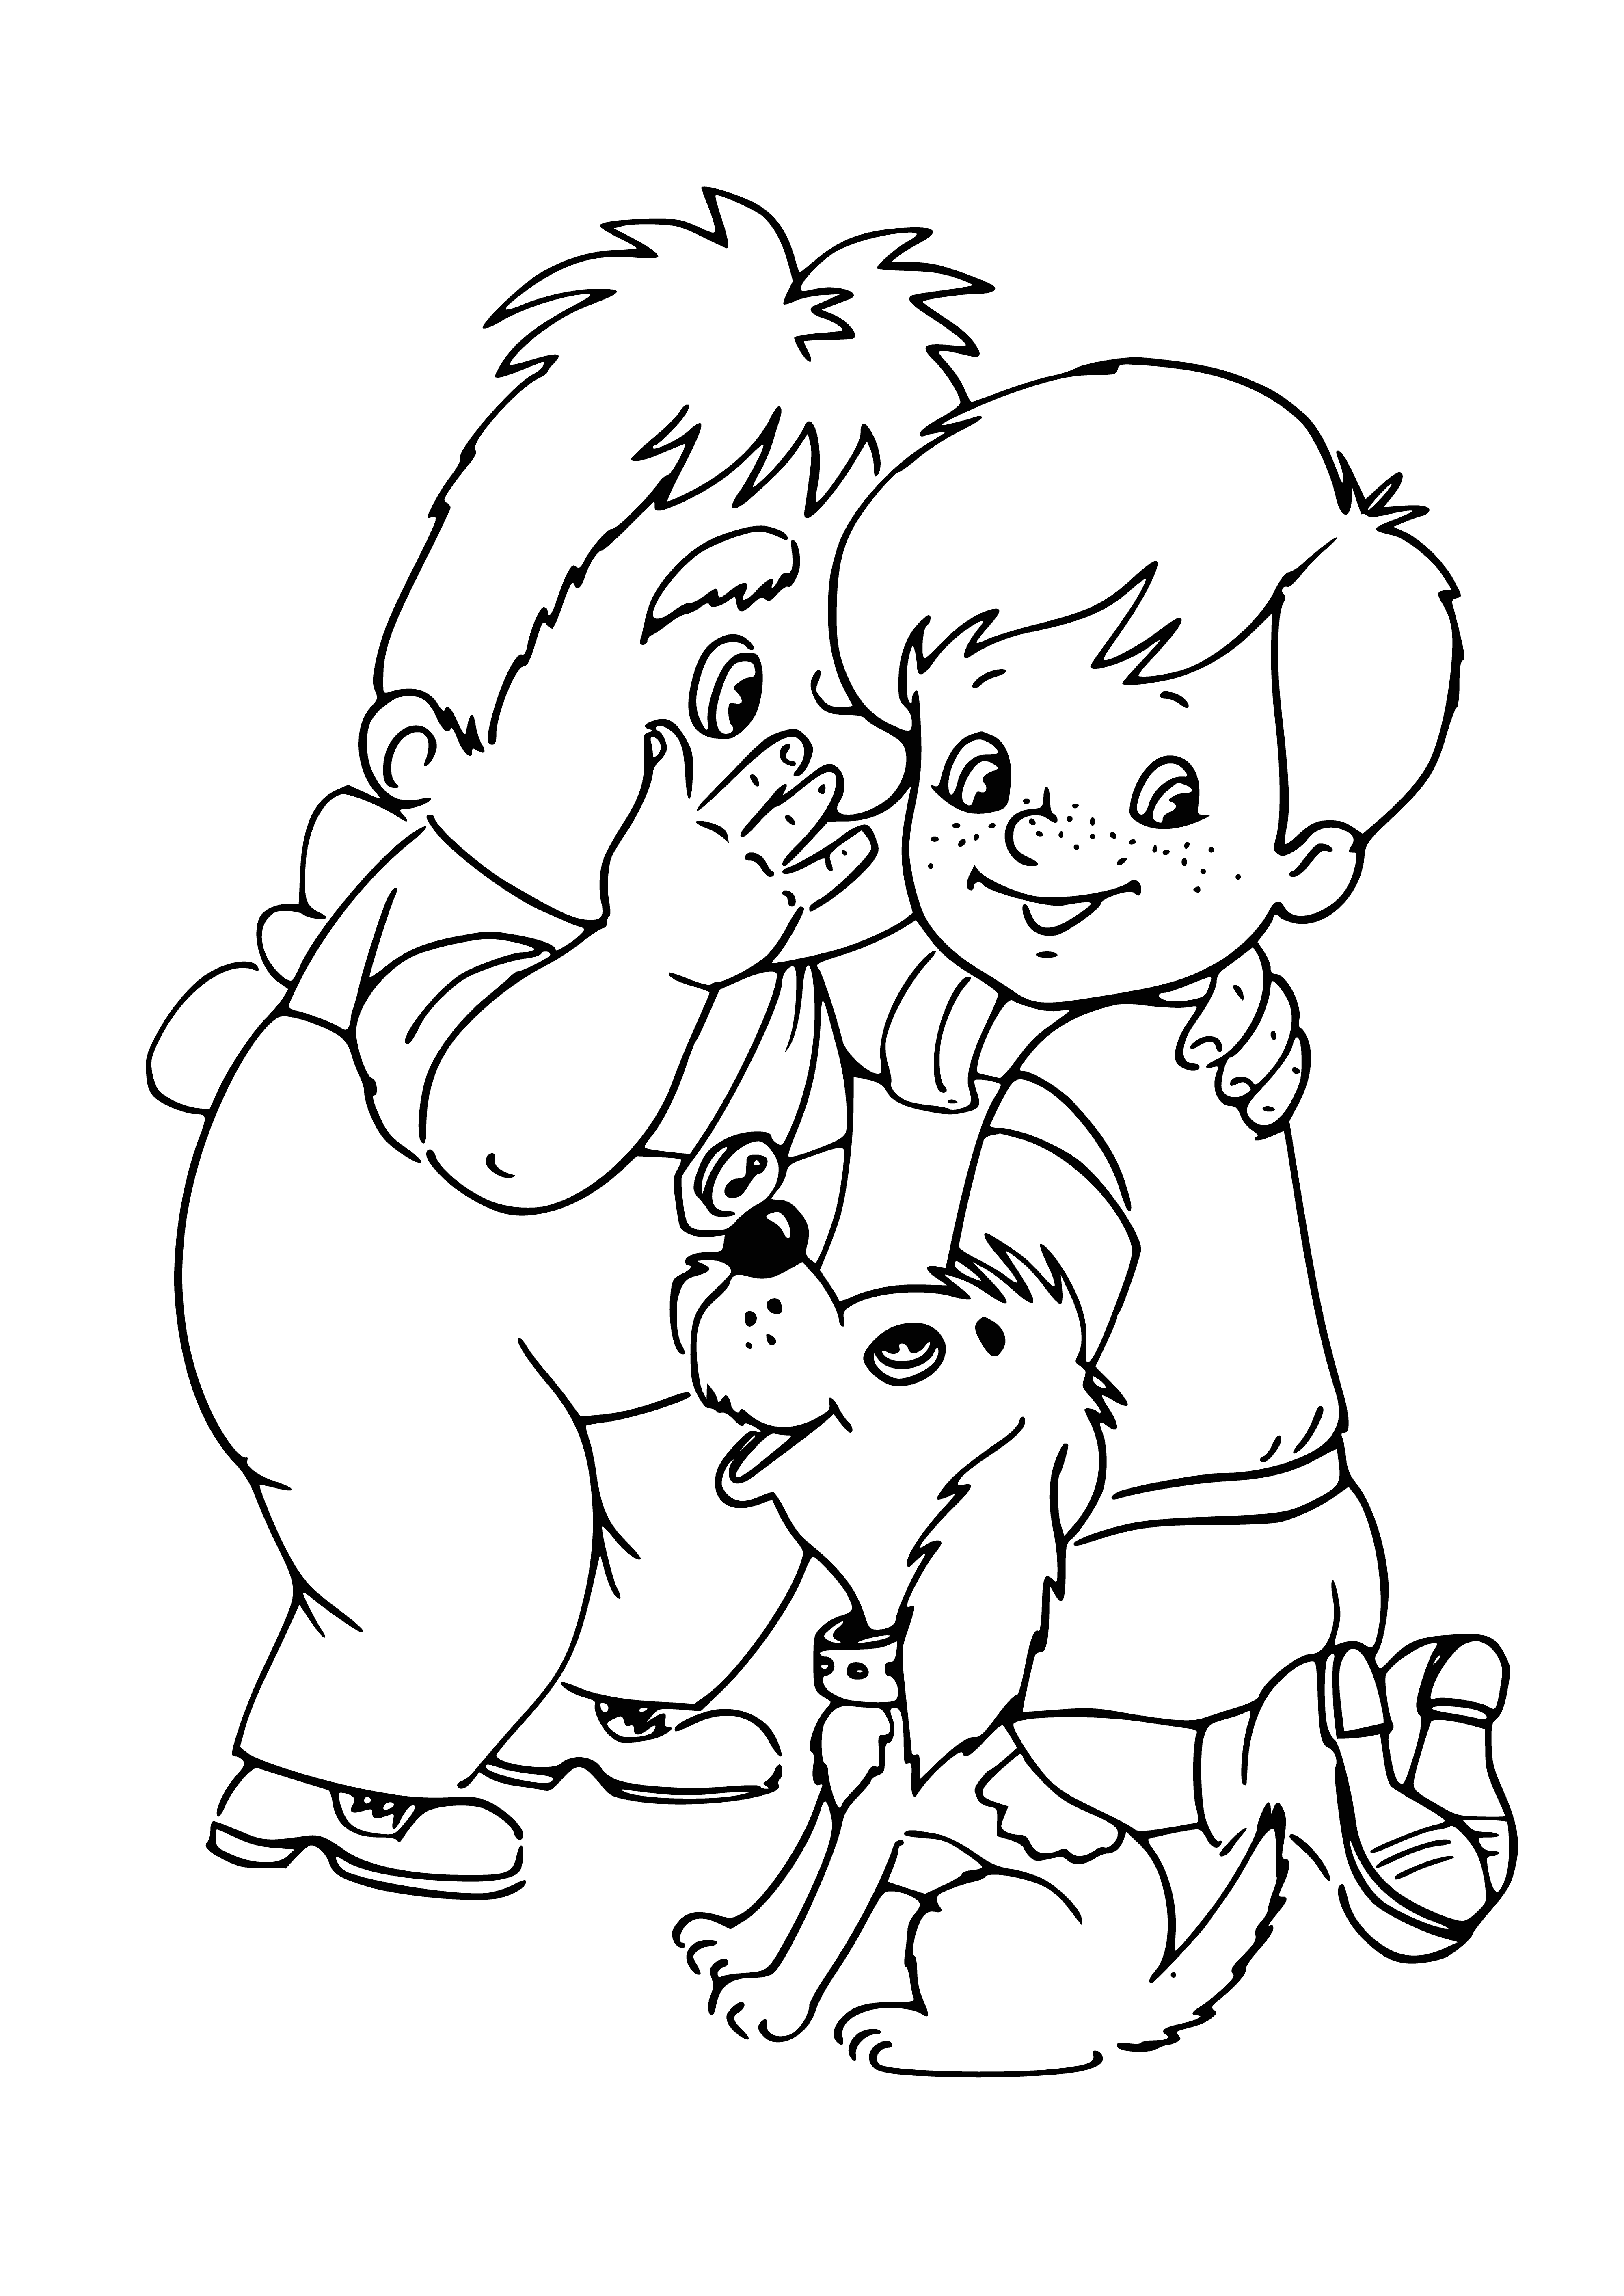 coloring page: Two friends hug in front of a brick wall: a young boy wearing a cartoon T-shirt & blue jeans and a man in a yellow T-shirt & khaki pants, both smiling with missing teeth.